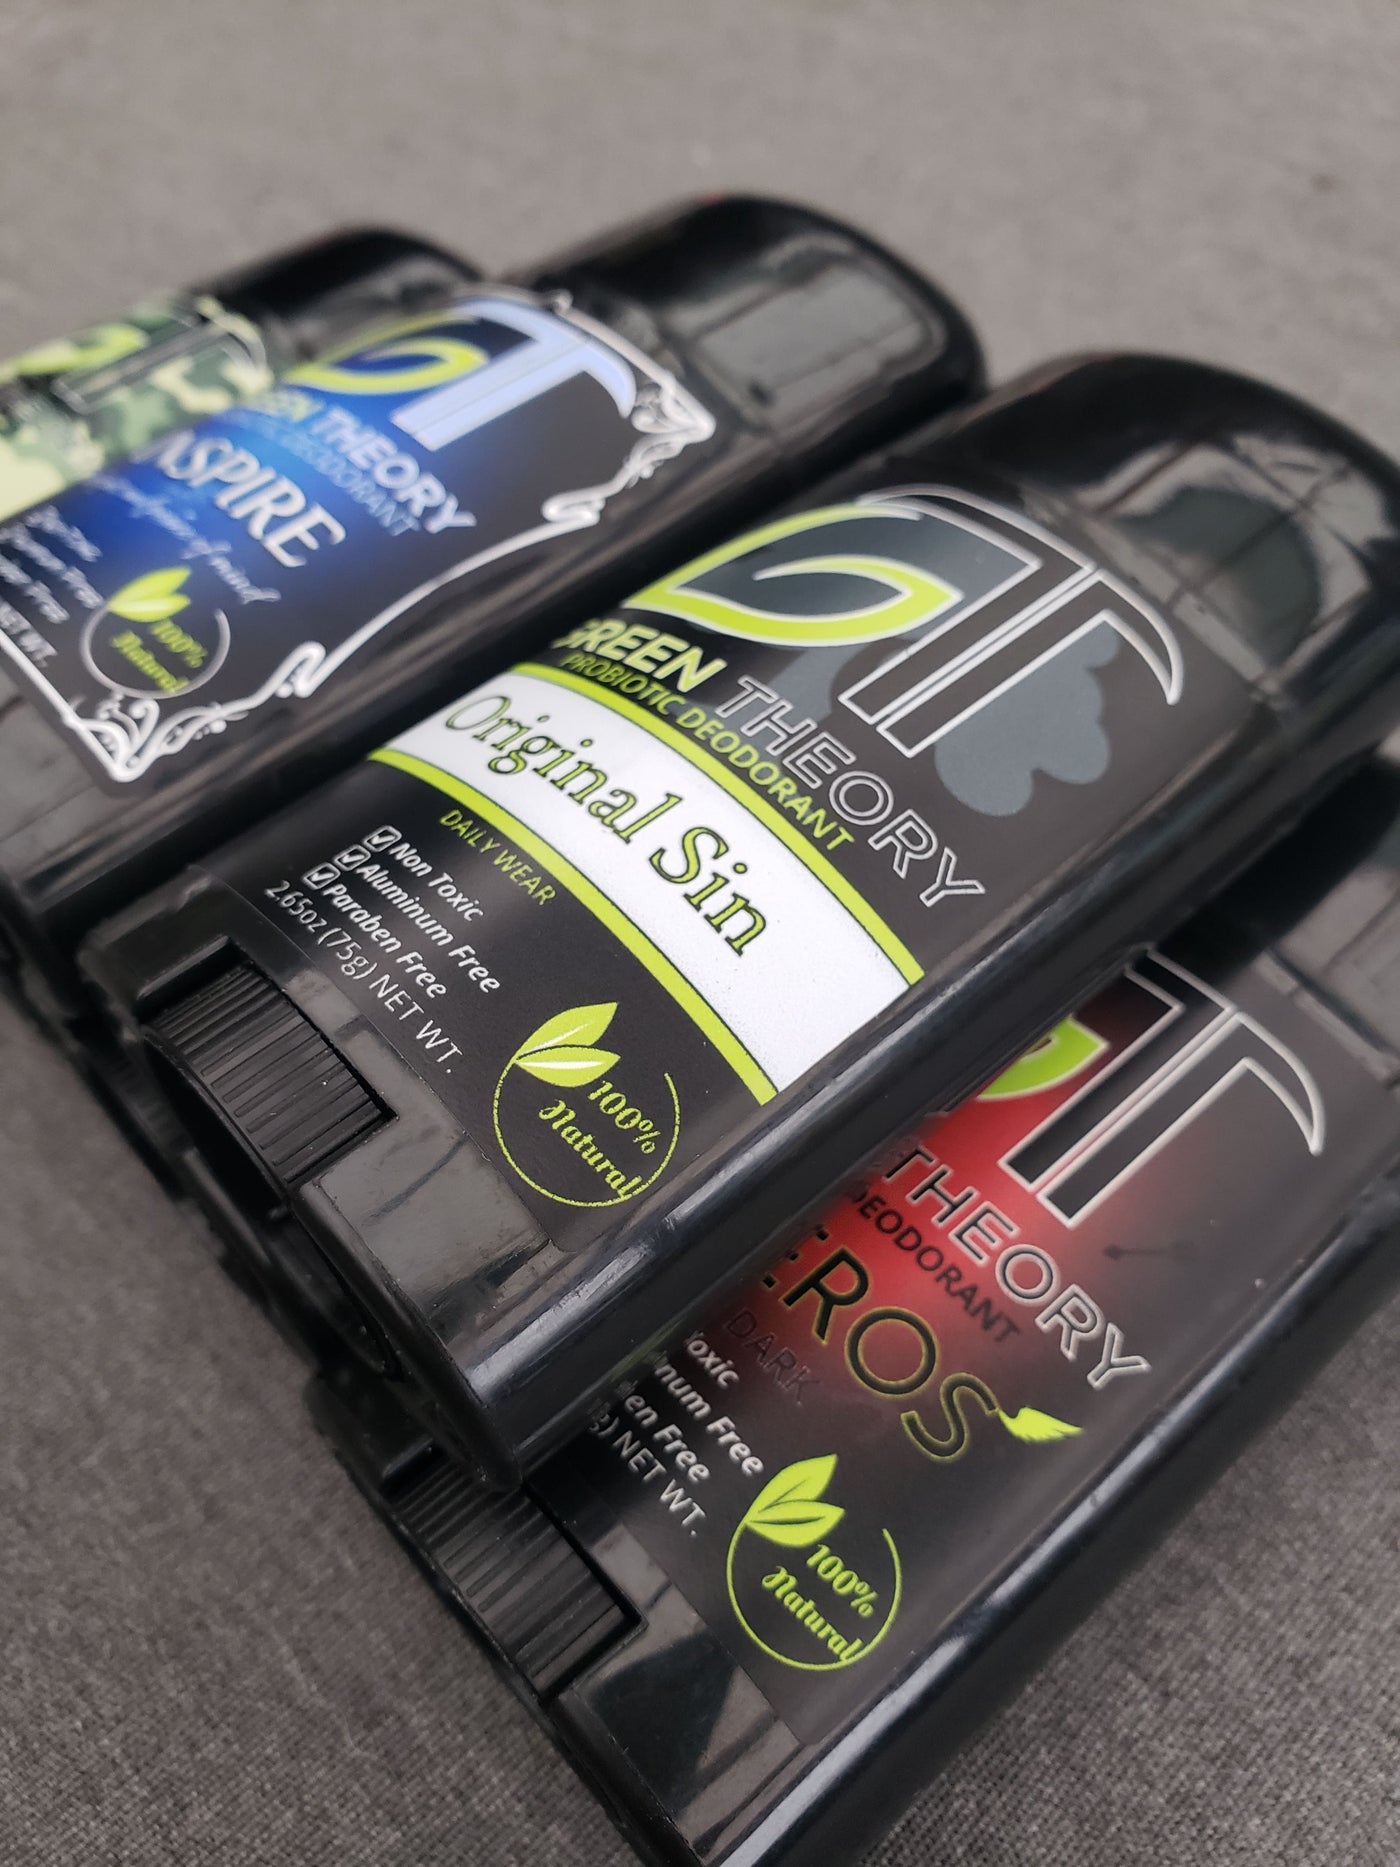 stack of green theory all natural probiotic deodorants. Pictured are original sin mens deodorant, inspire womens deodorant and anteros mens deodorant on a grey background. Deodorant sticks are a sleek black plastic container with large GT logo and scent